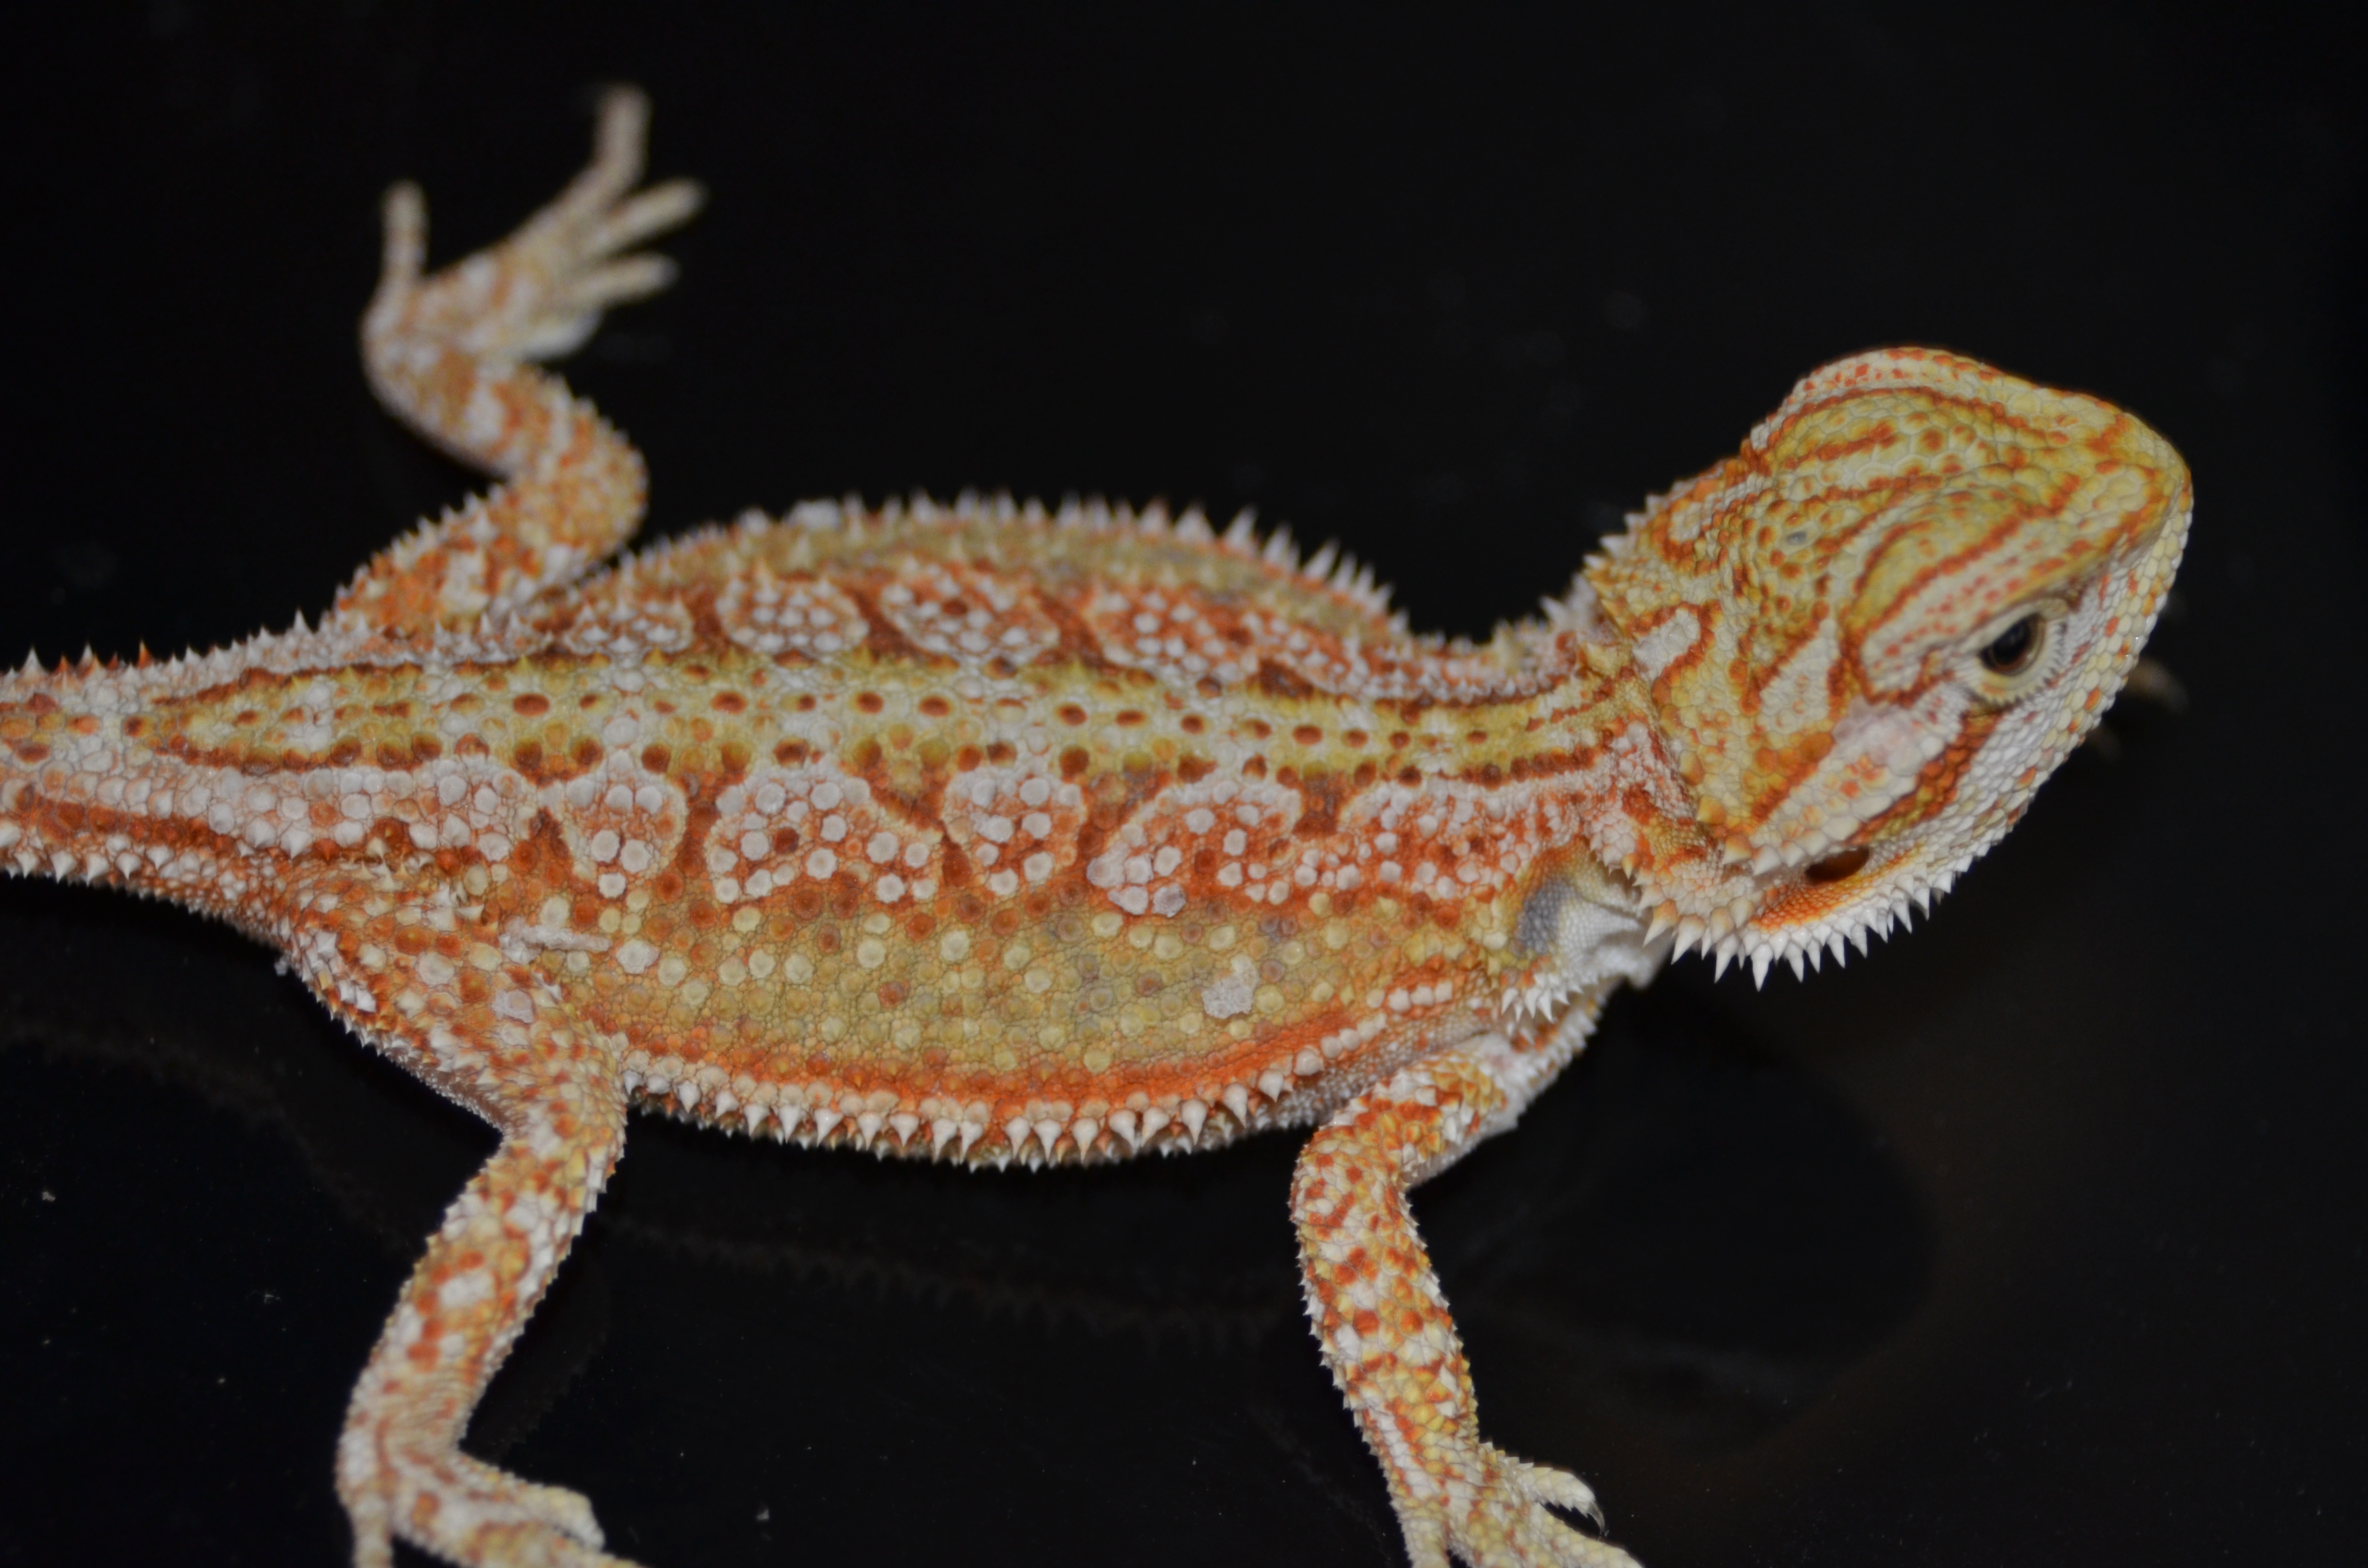 What is the citrus tiger bearded dragon?